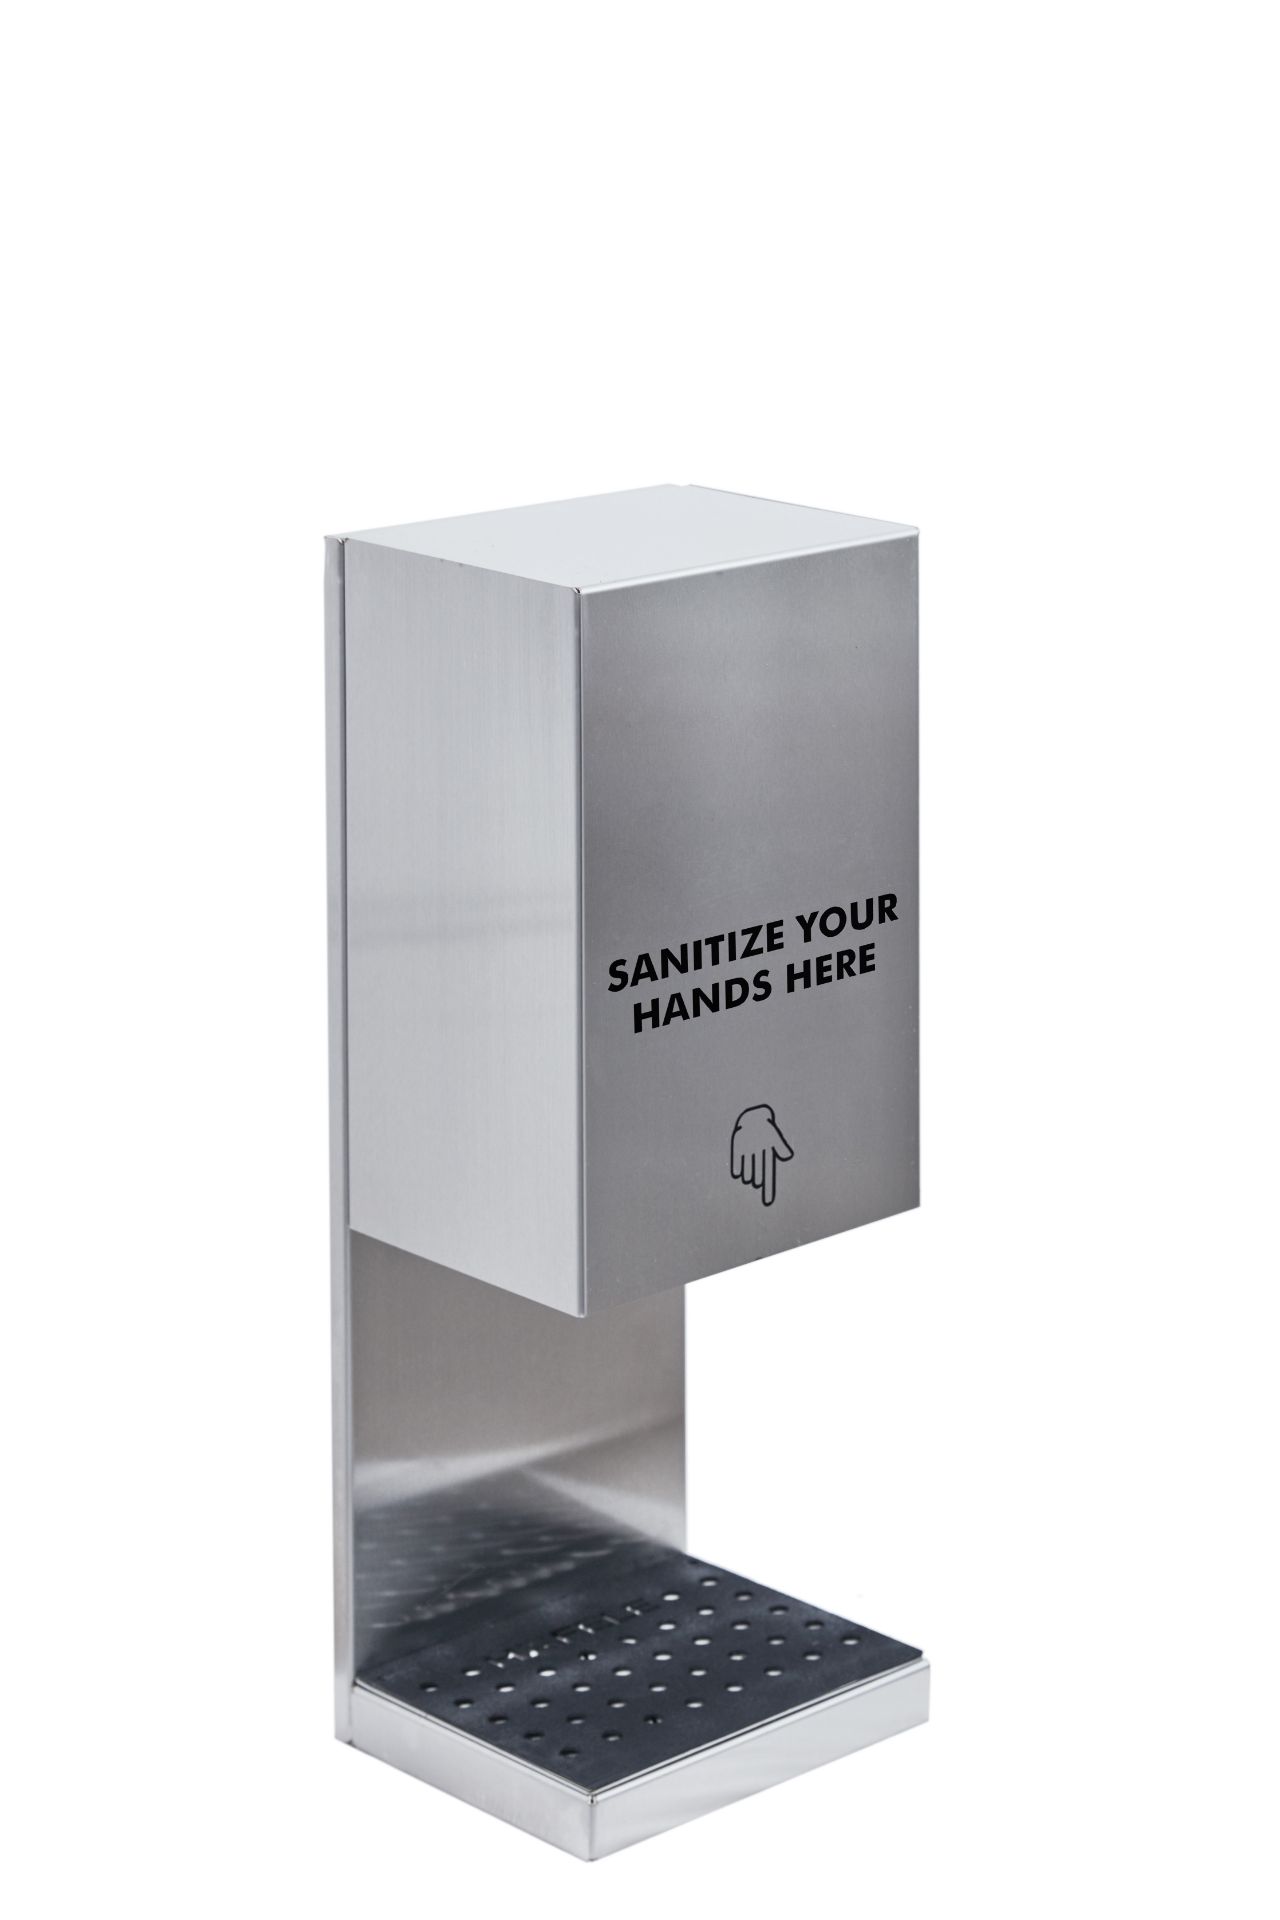 Presols Wall Mounted | Automatic Hand Soap Dispenser | Great For Branding | Sensor Based Automatic.. - Image 2 of 5